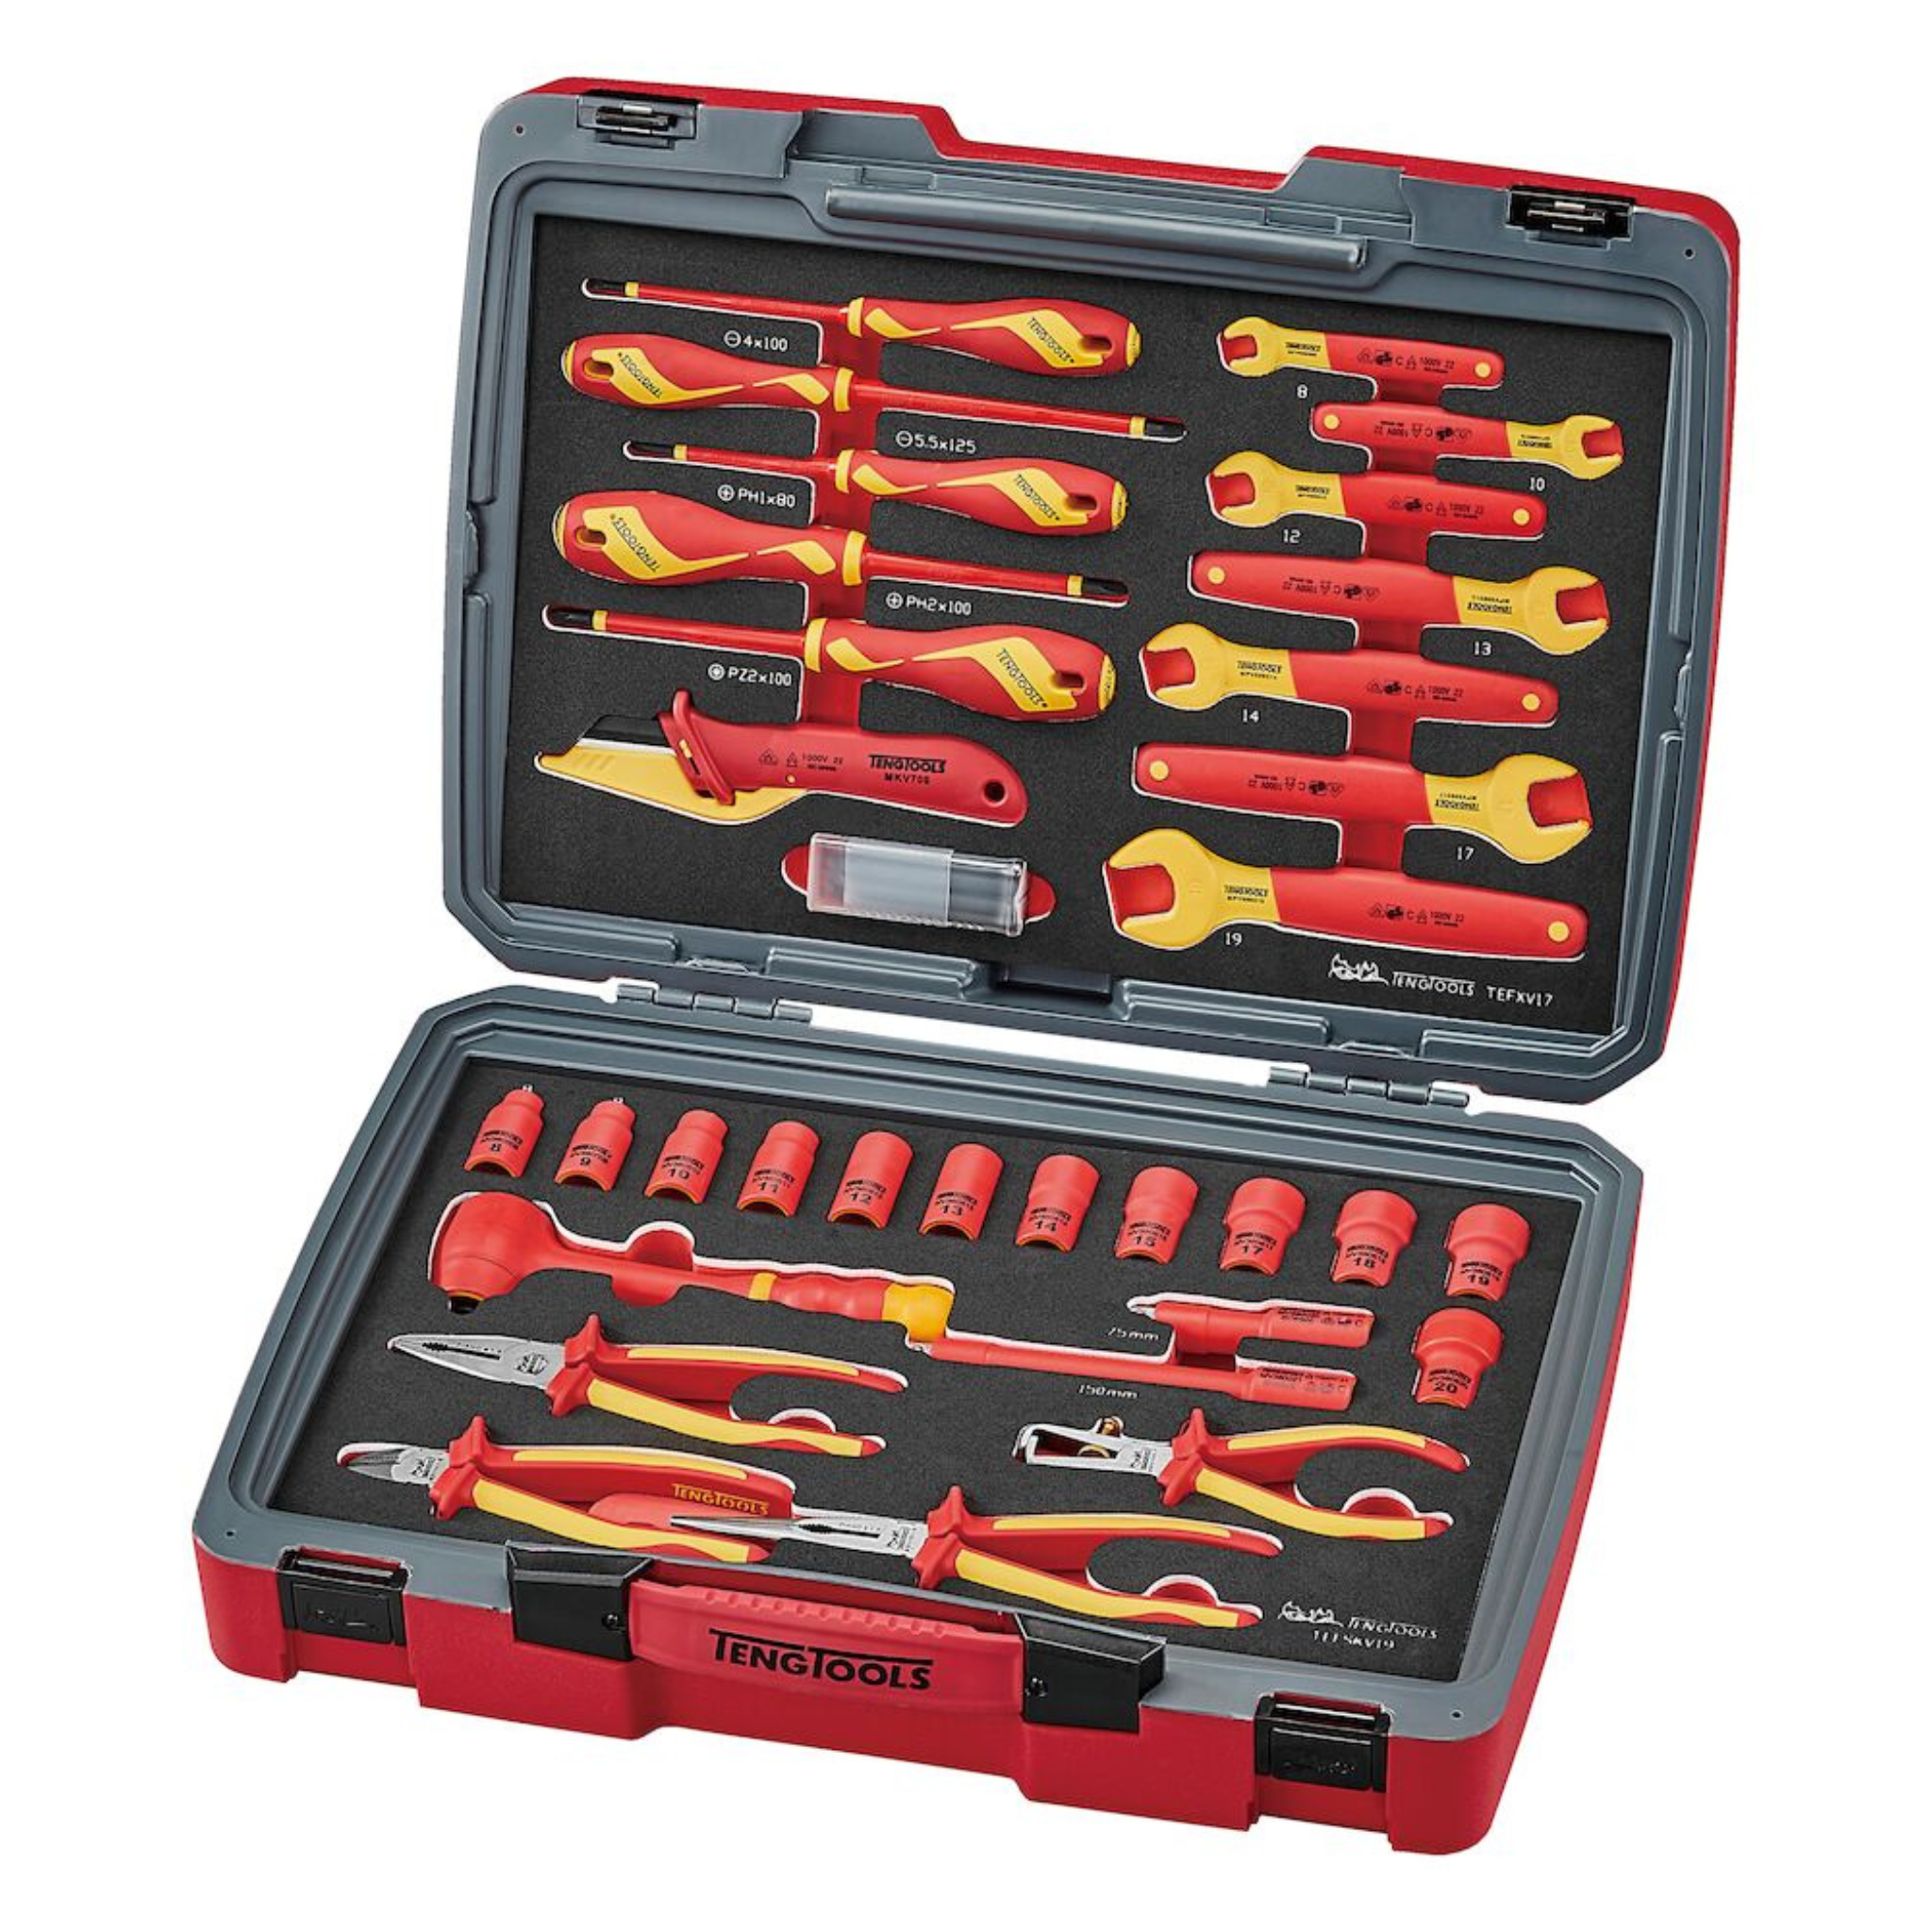 Teng Tools Non-Slip Safety Utility Knife / Box Cutters with